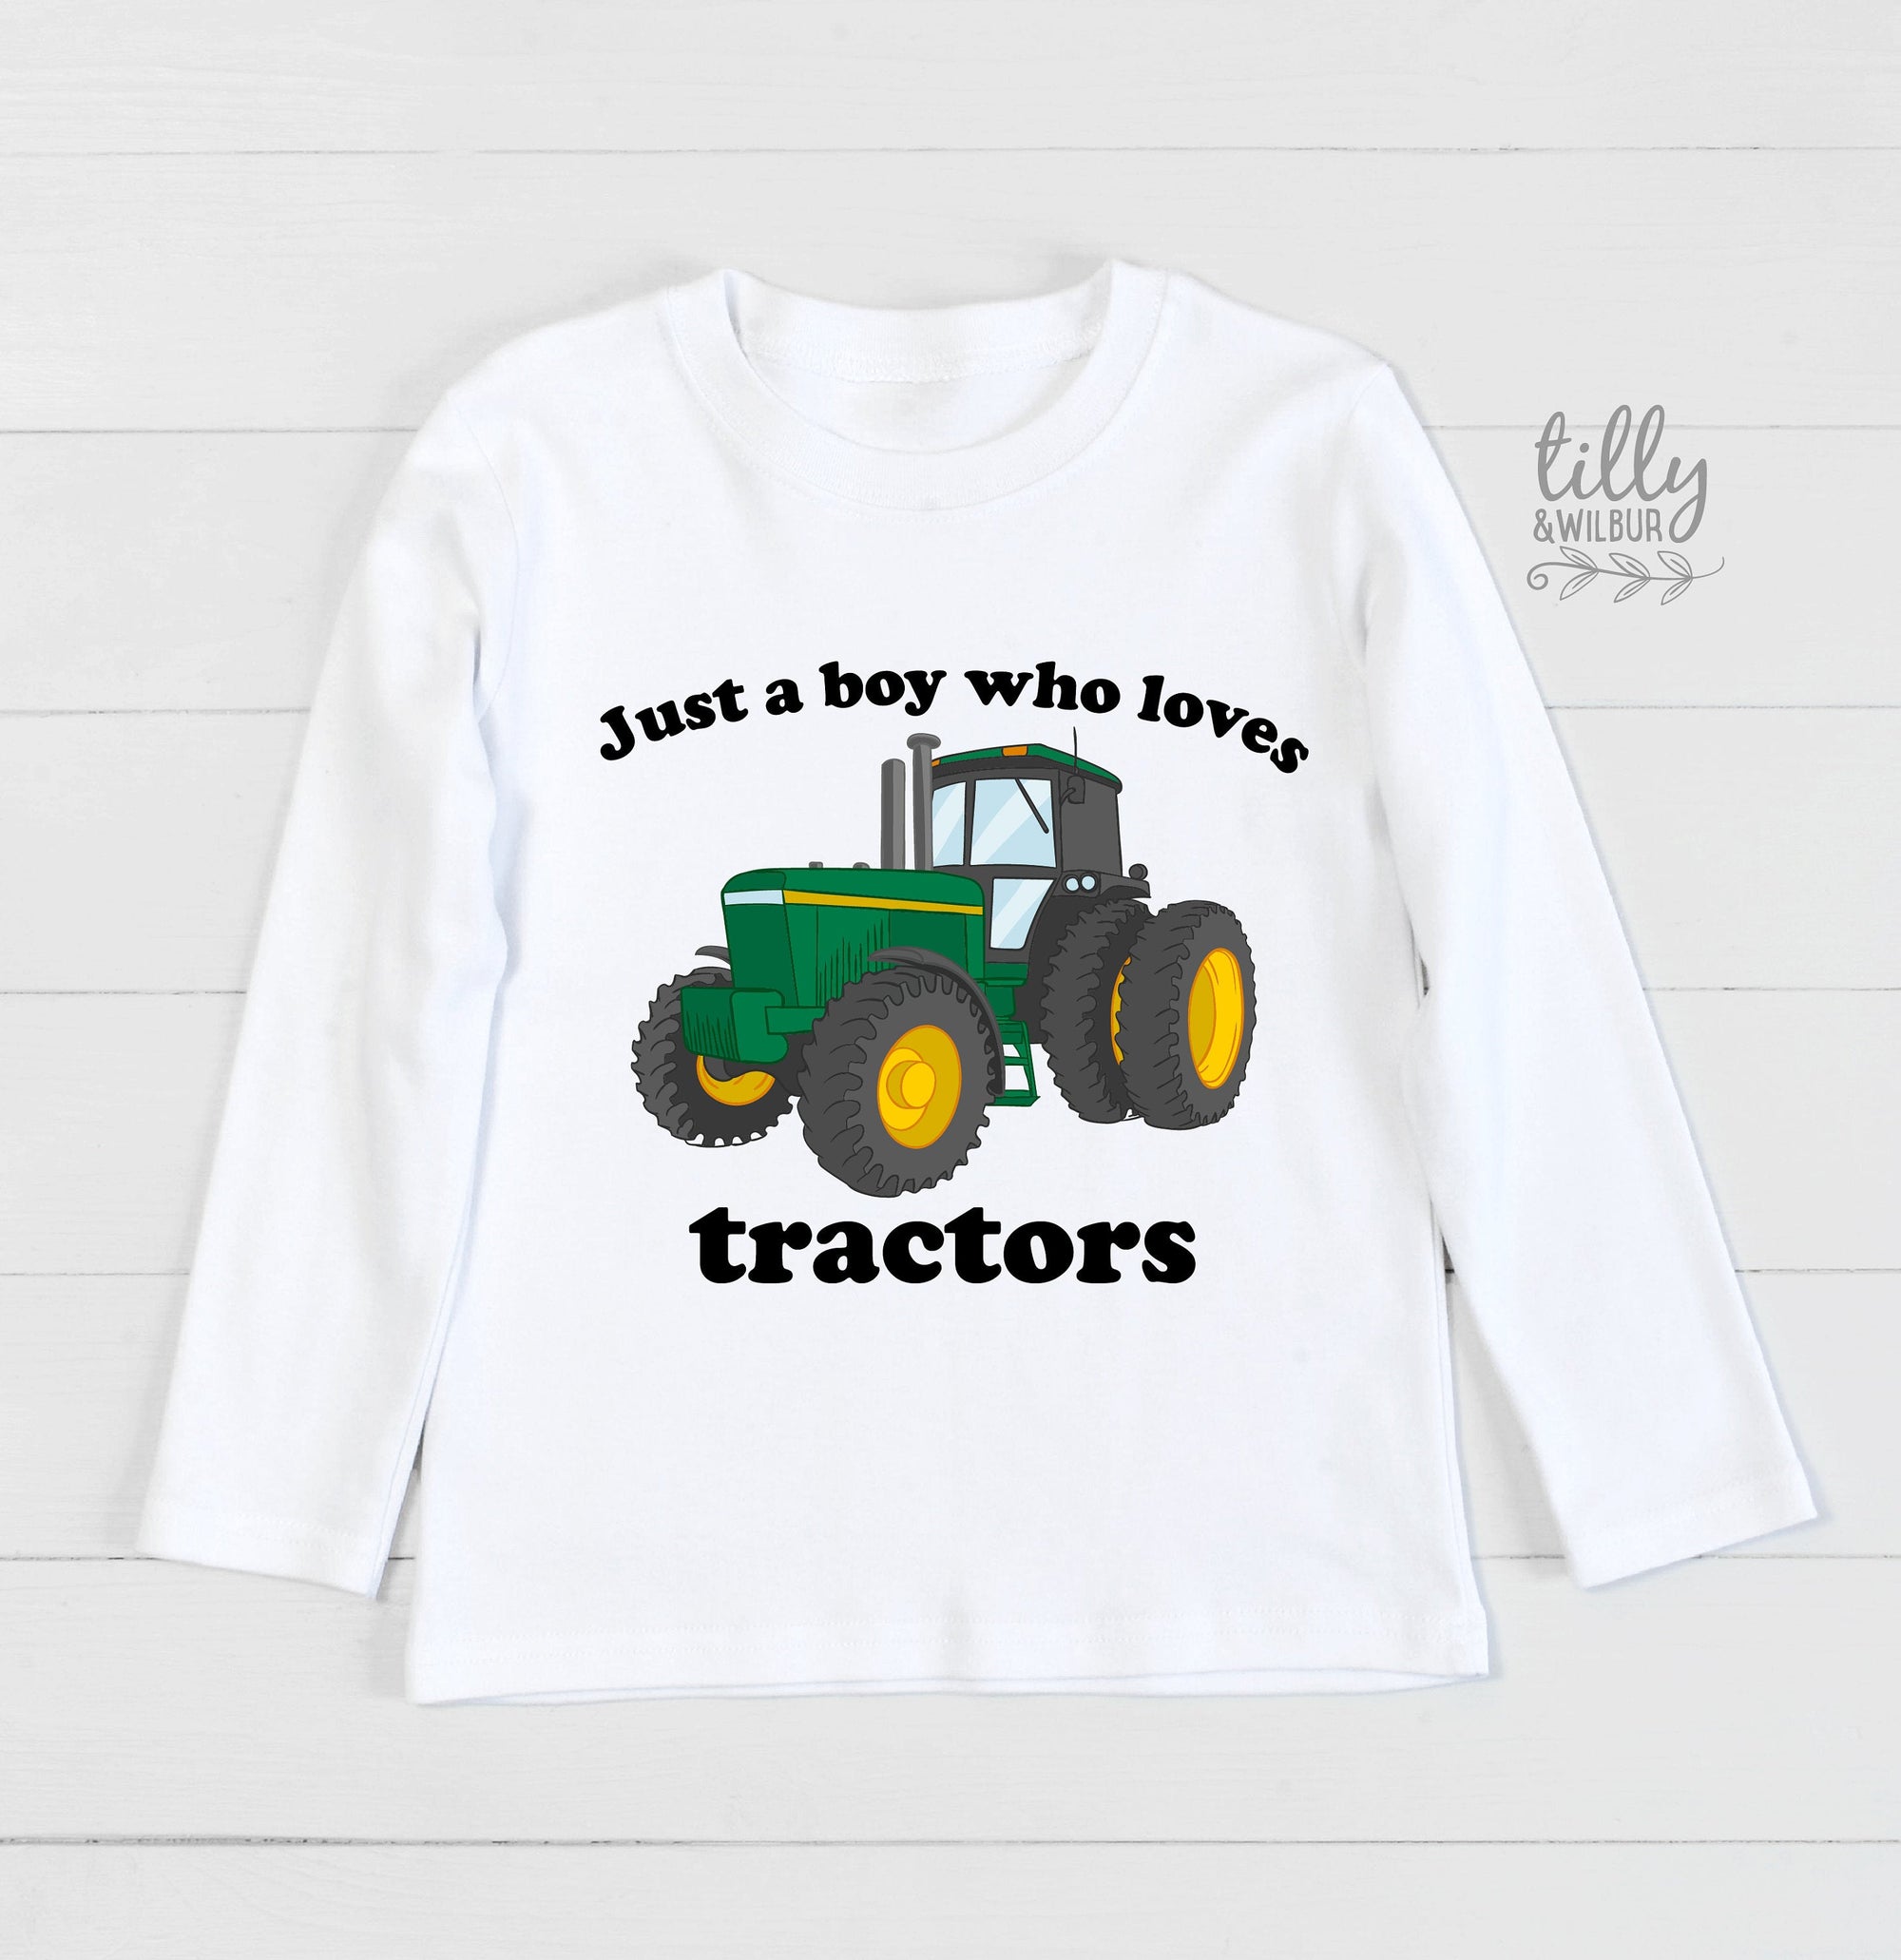 Just a Boy Who Loves Tractors T-Shirt, Tractor T-Shirt, I Love Tractors T-Shirt, Farm Life, Tractor Lover Gift, Tractor Shirt, Farmer Shirt